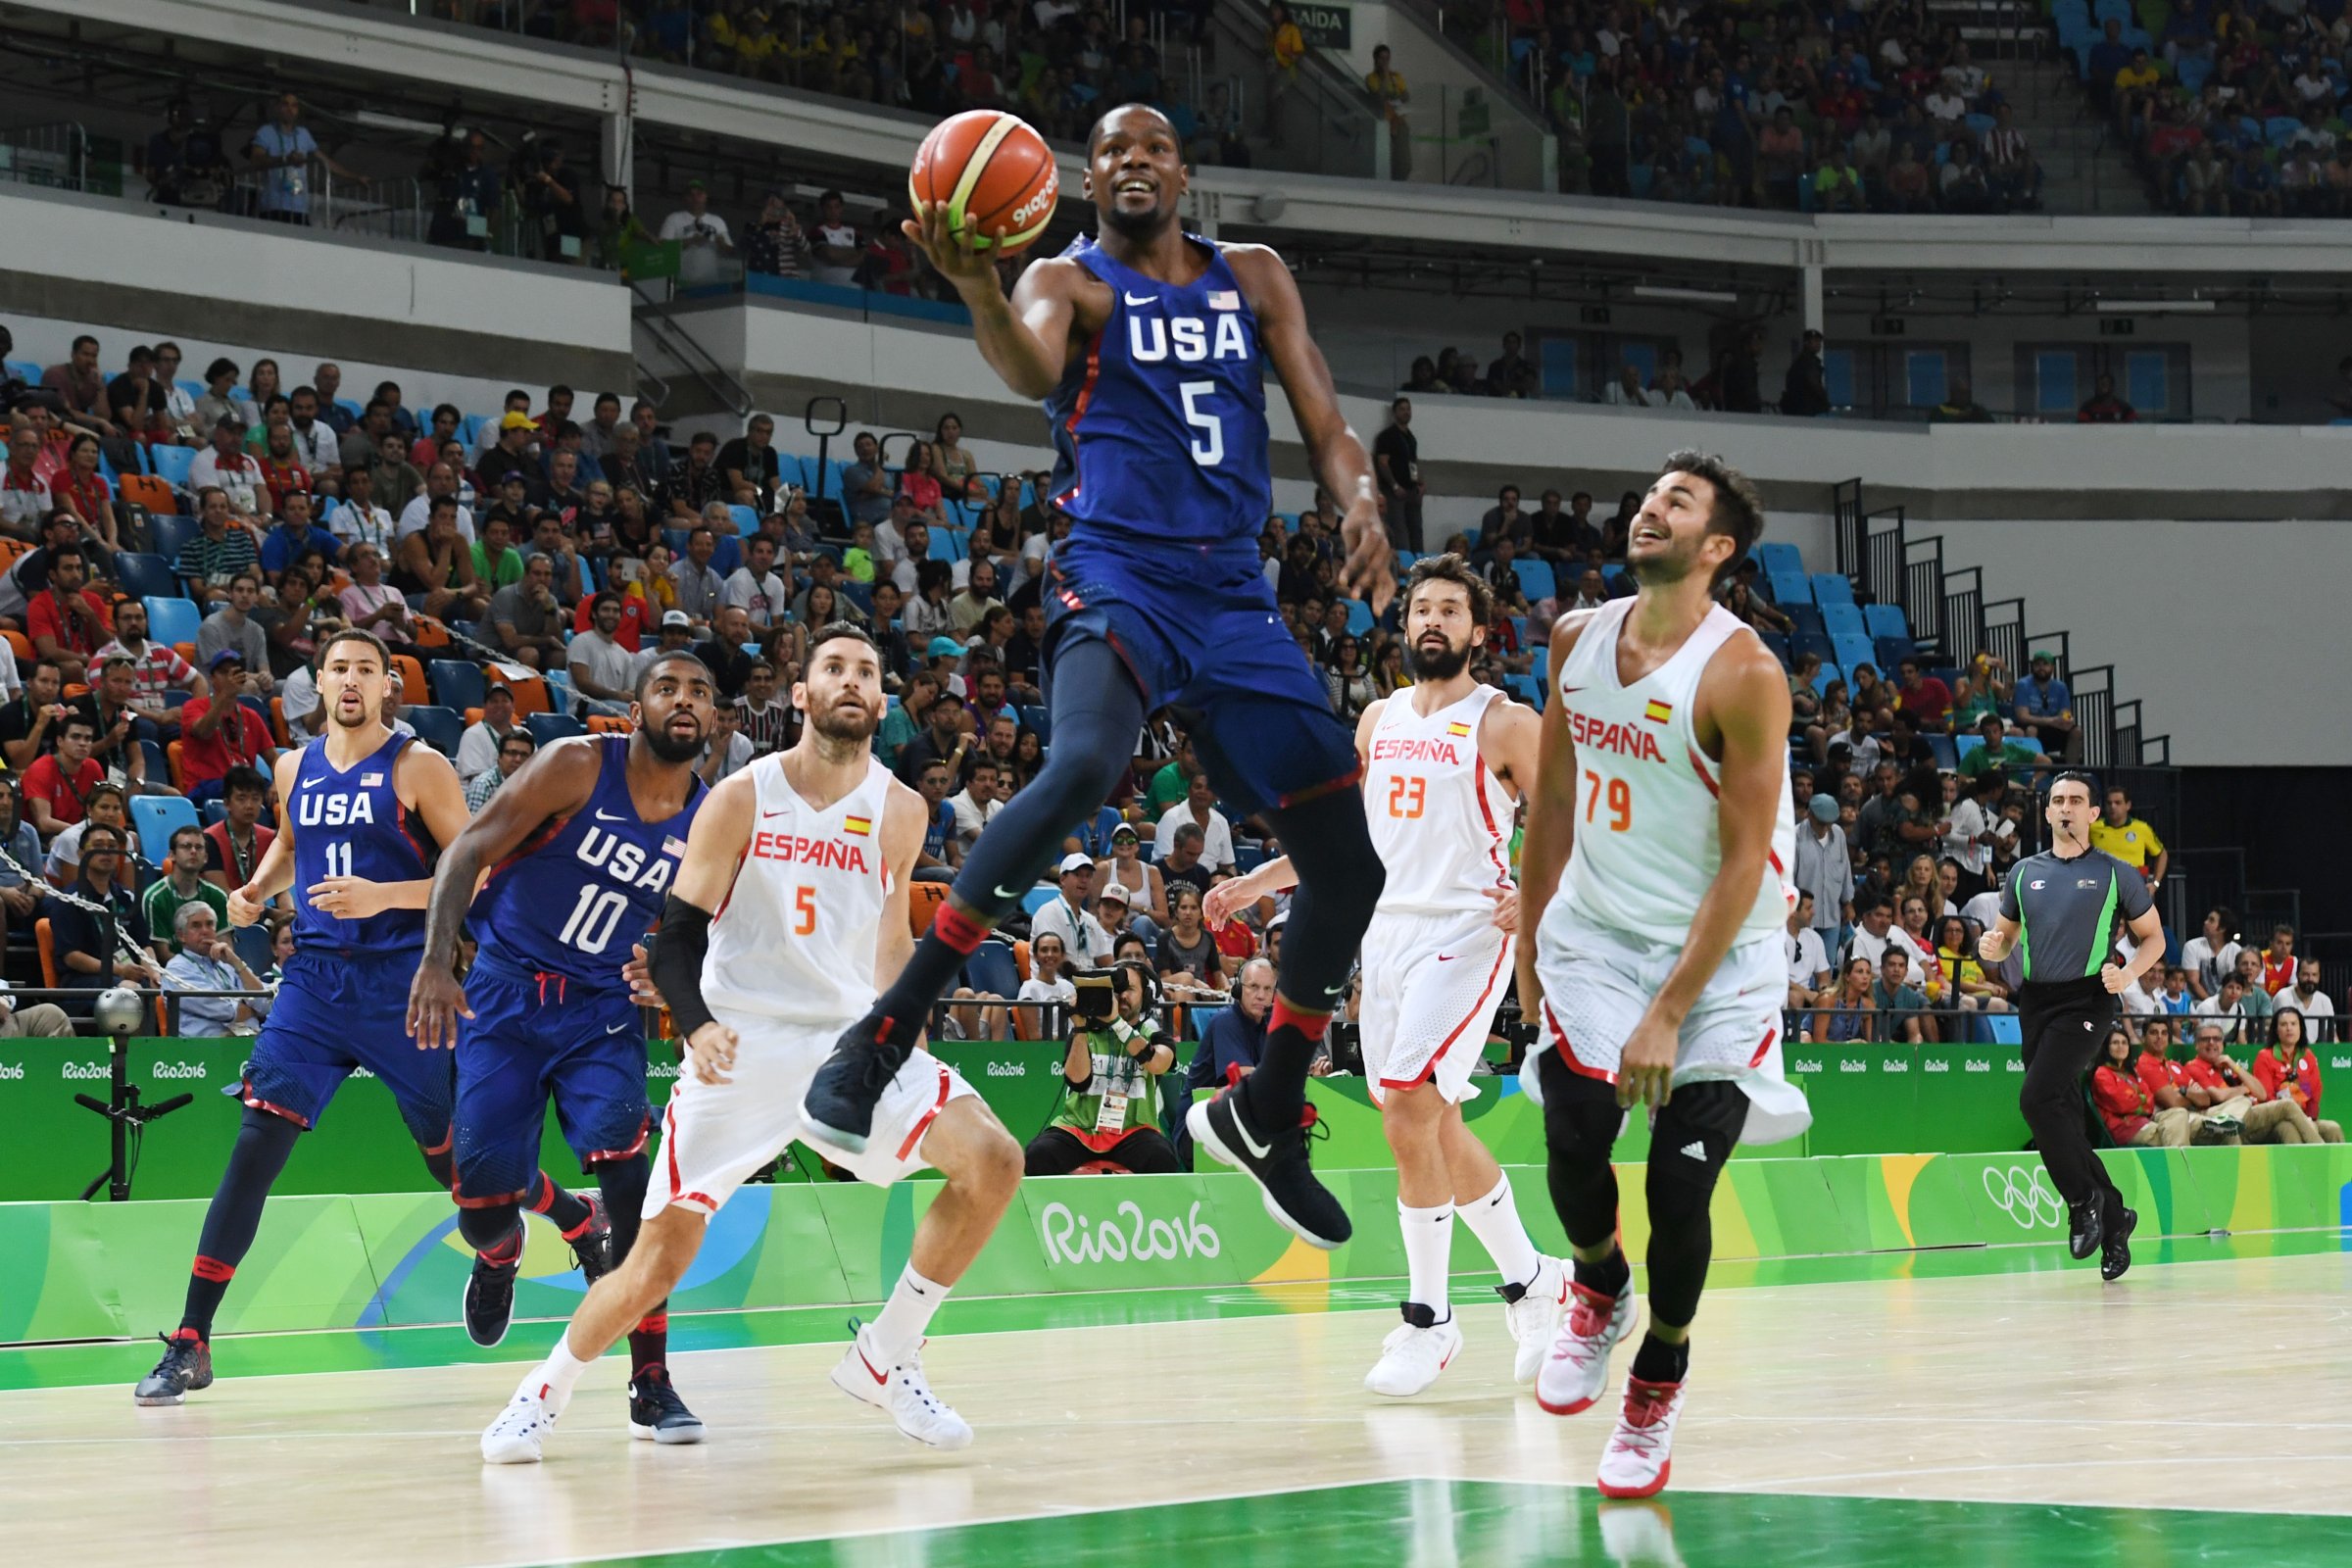 USA's guard Kevin Durant (C) jumps for a basket during a Men's semifinal basketball match between Spain and USA at the Carioca Arena 1 in Rio de Janeiro on August 19, 2016 during the Rio 2016 Olympic Games.